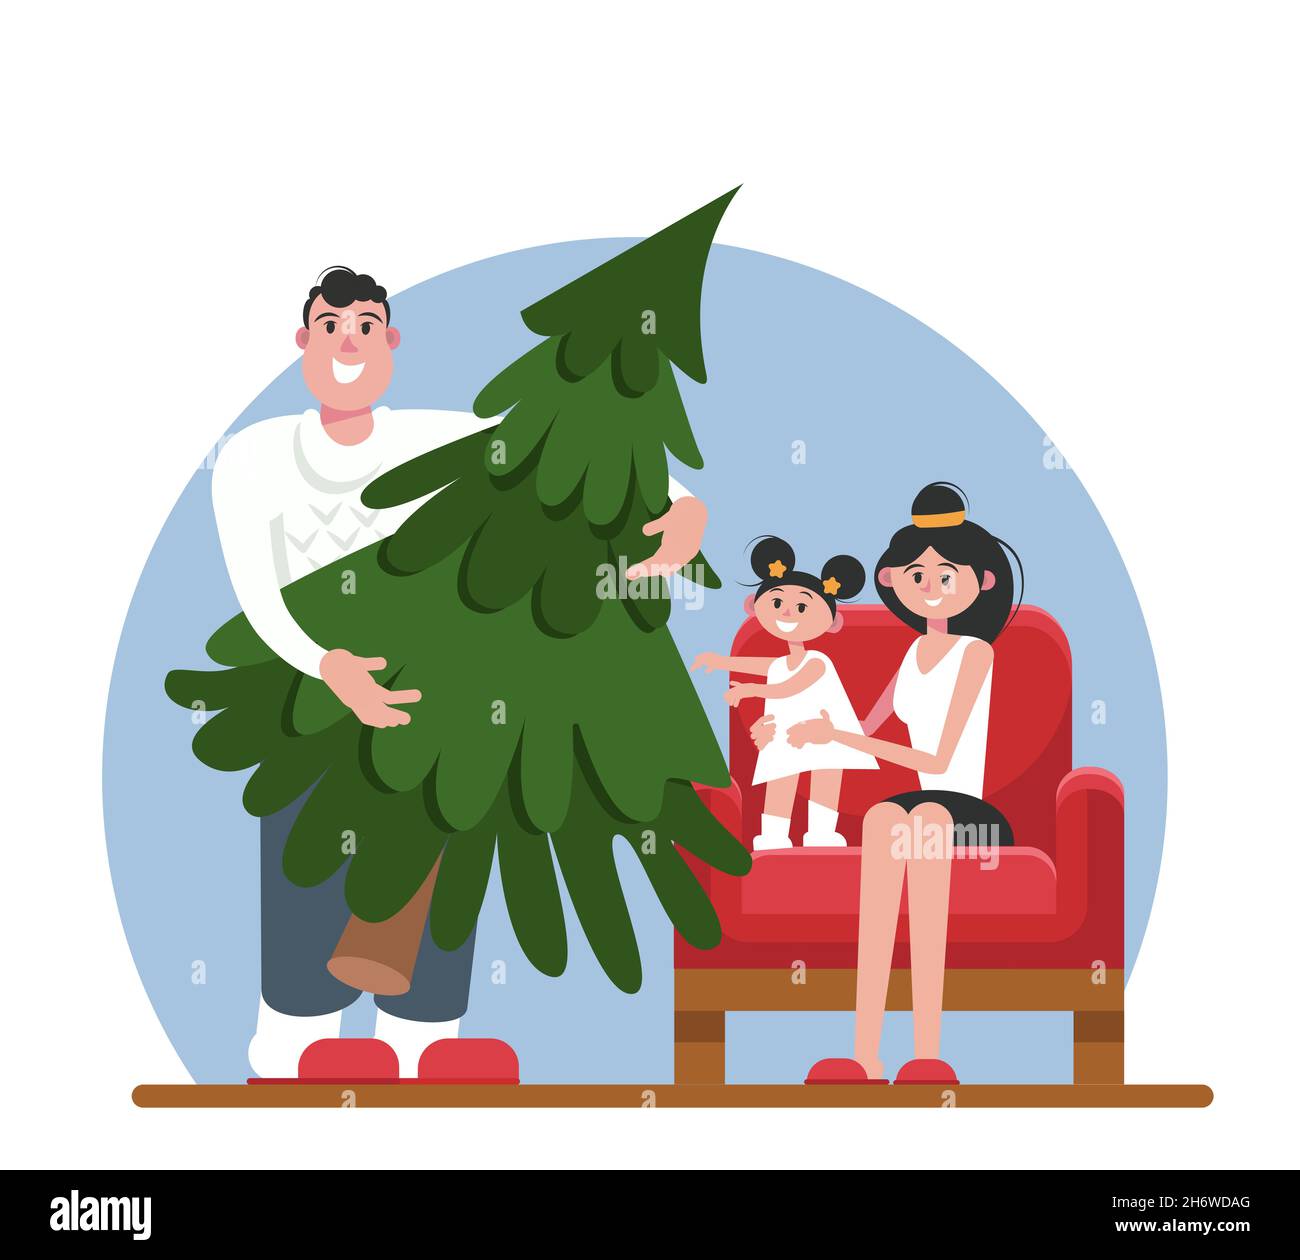 Happy family getting ready for christmas and new year. The father is holding a Christmas tree brought from the forest. Happy daughter and parents. Stock Vector